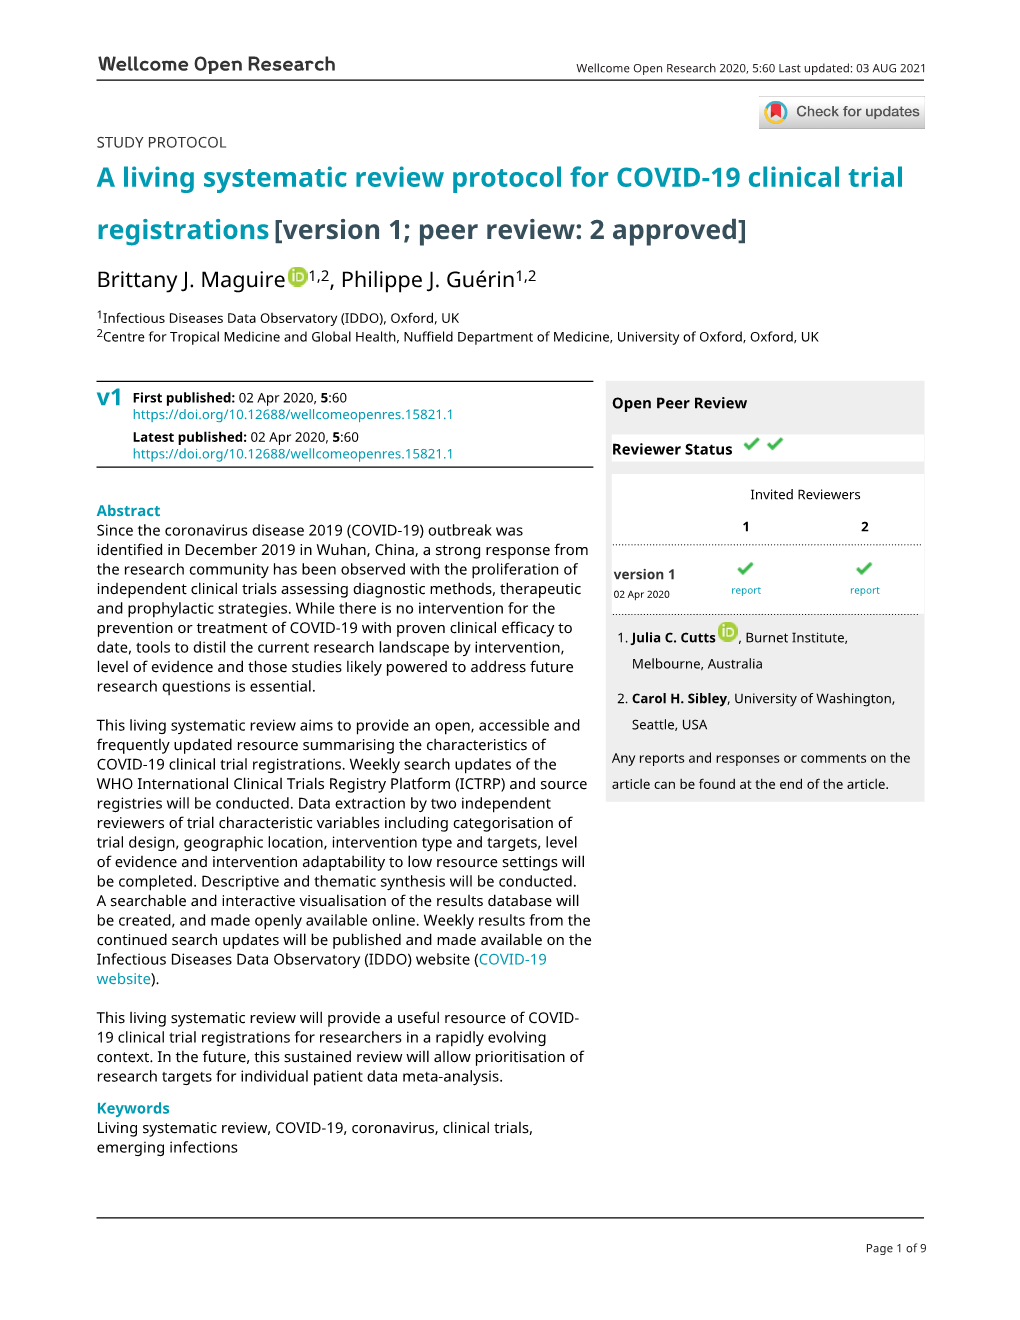 A Living Systematic Review Protocol for COVID-19 Clinical Trial Registrations [Version 1; Peer Review: 2 Approved]